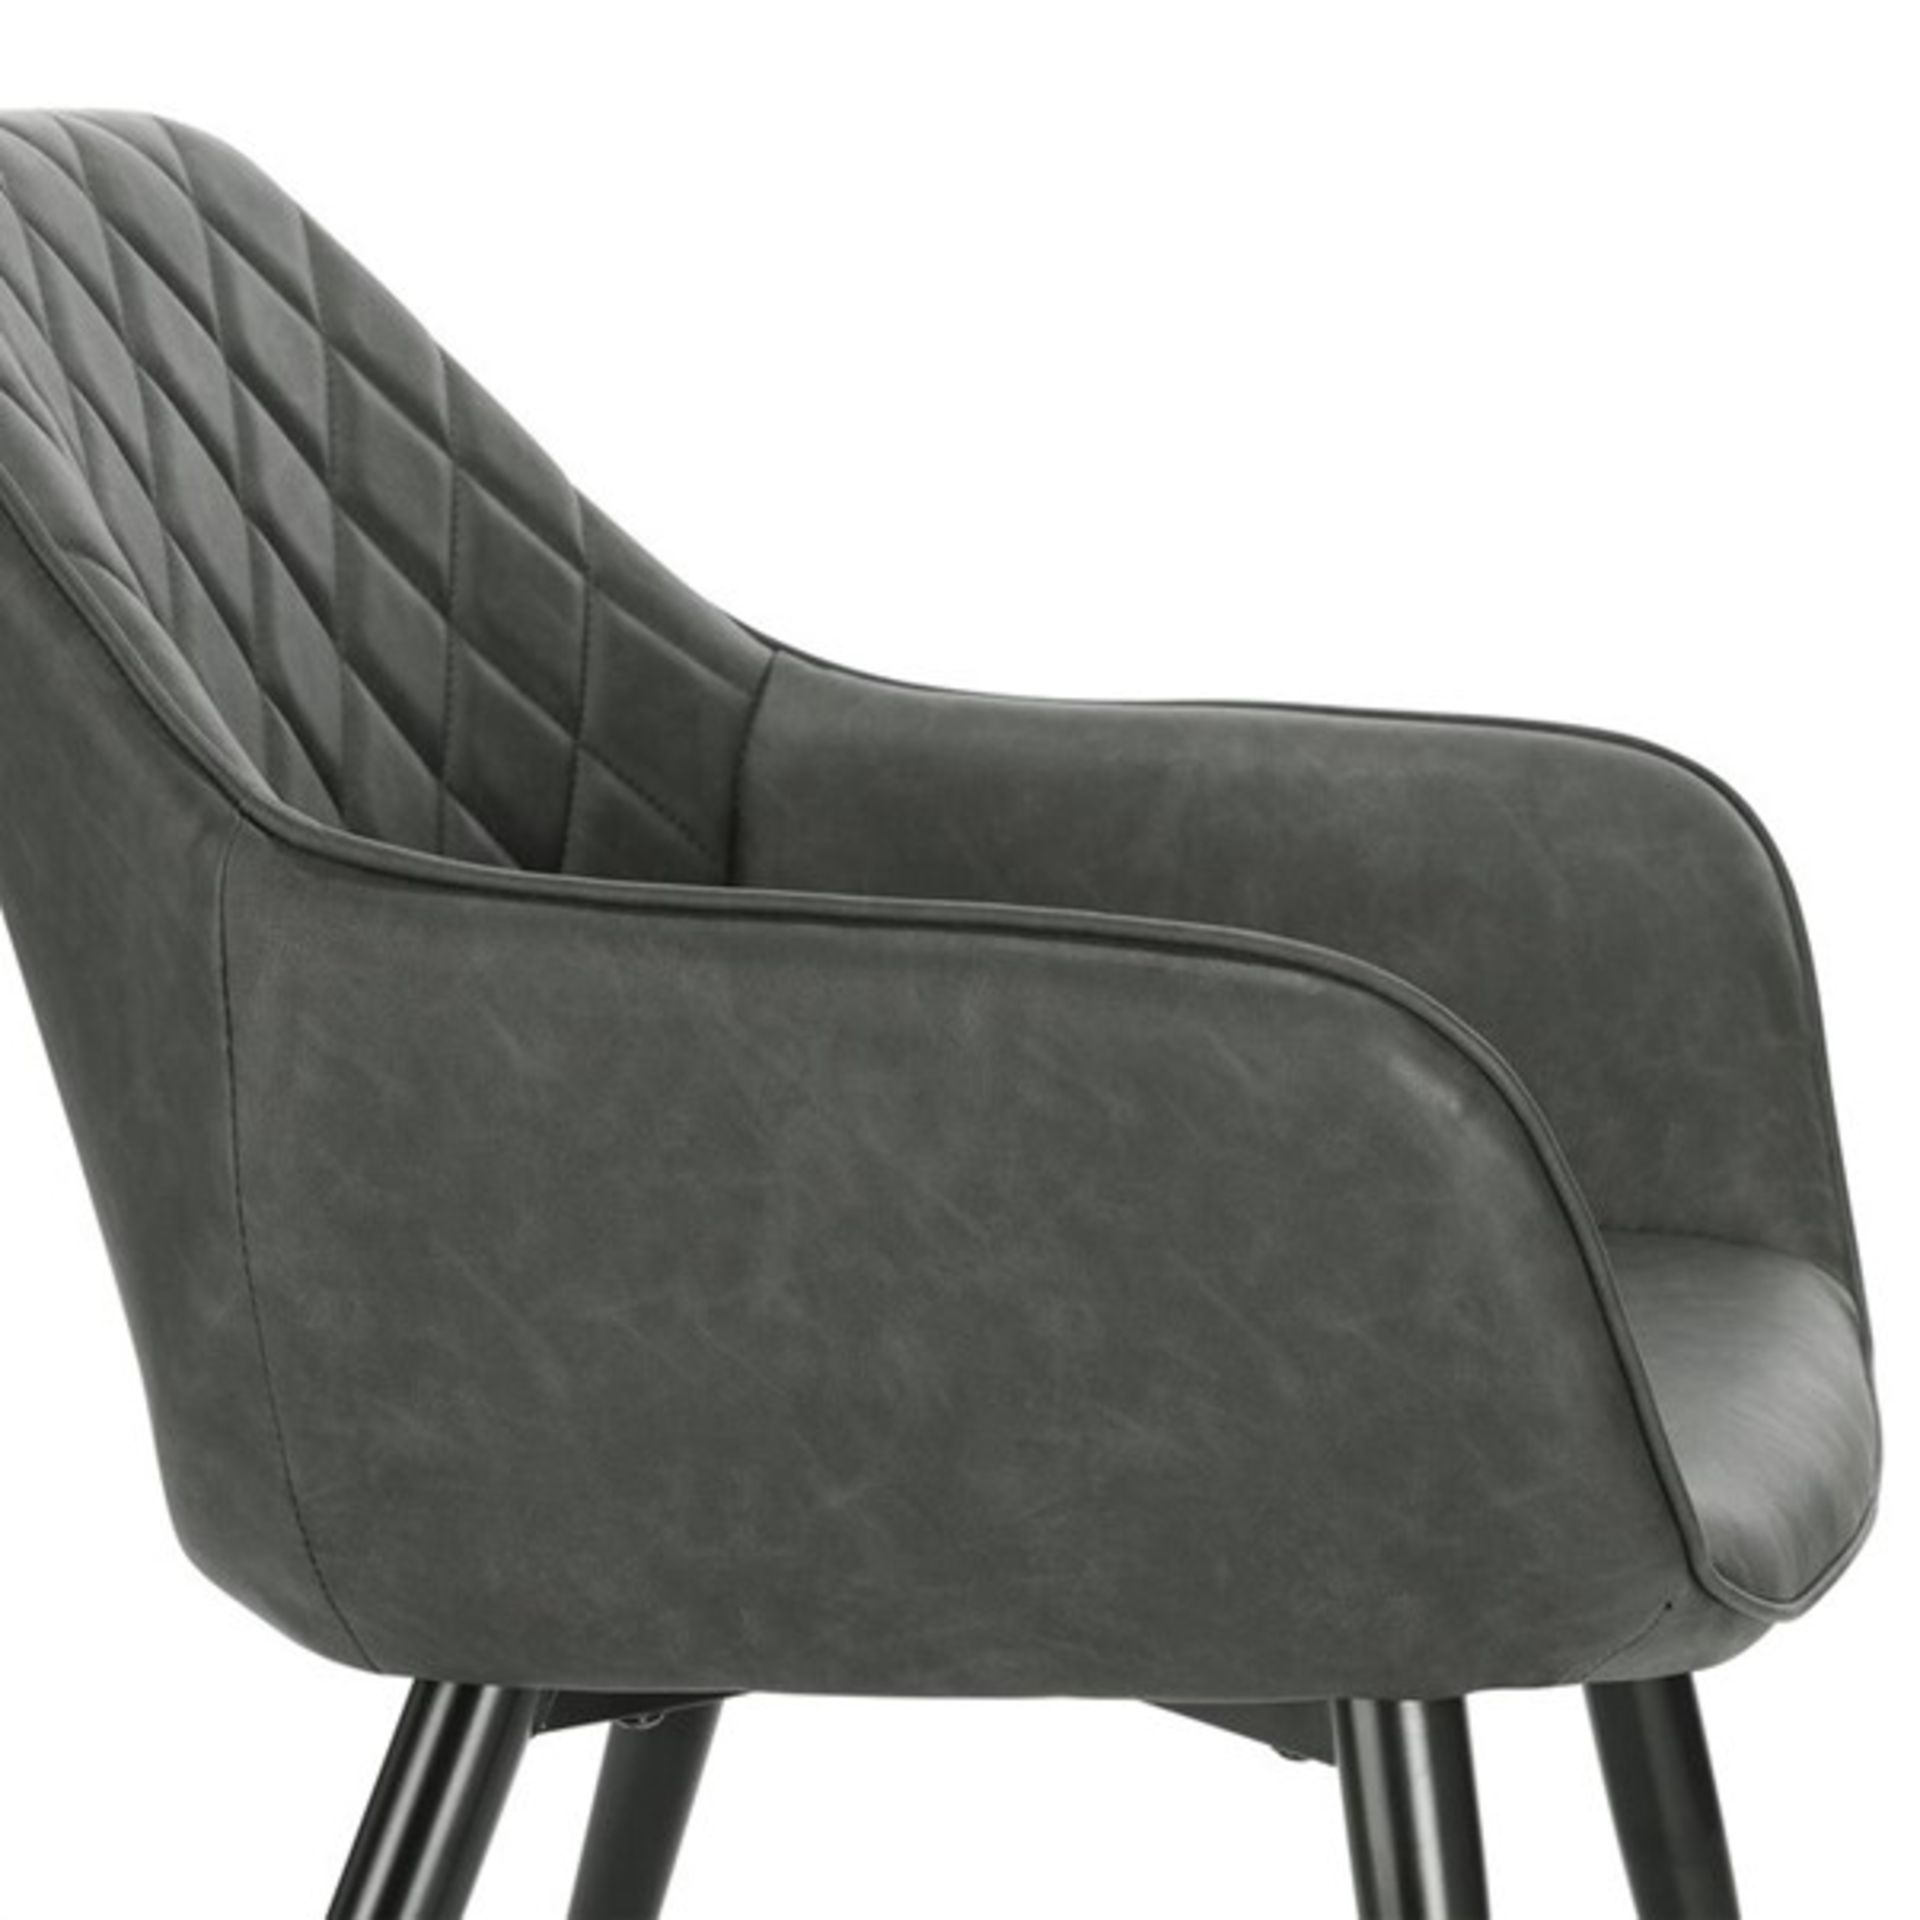 RRP £146.99 - One Wetumka Upholstered Dining Chair - 84cm H x 41cm W x 45cm D - Image 2 of 3